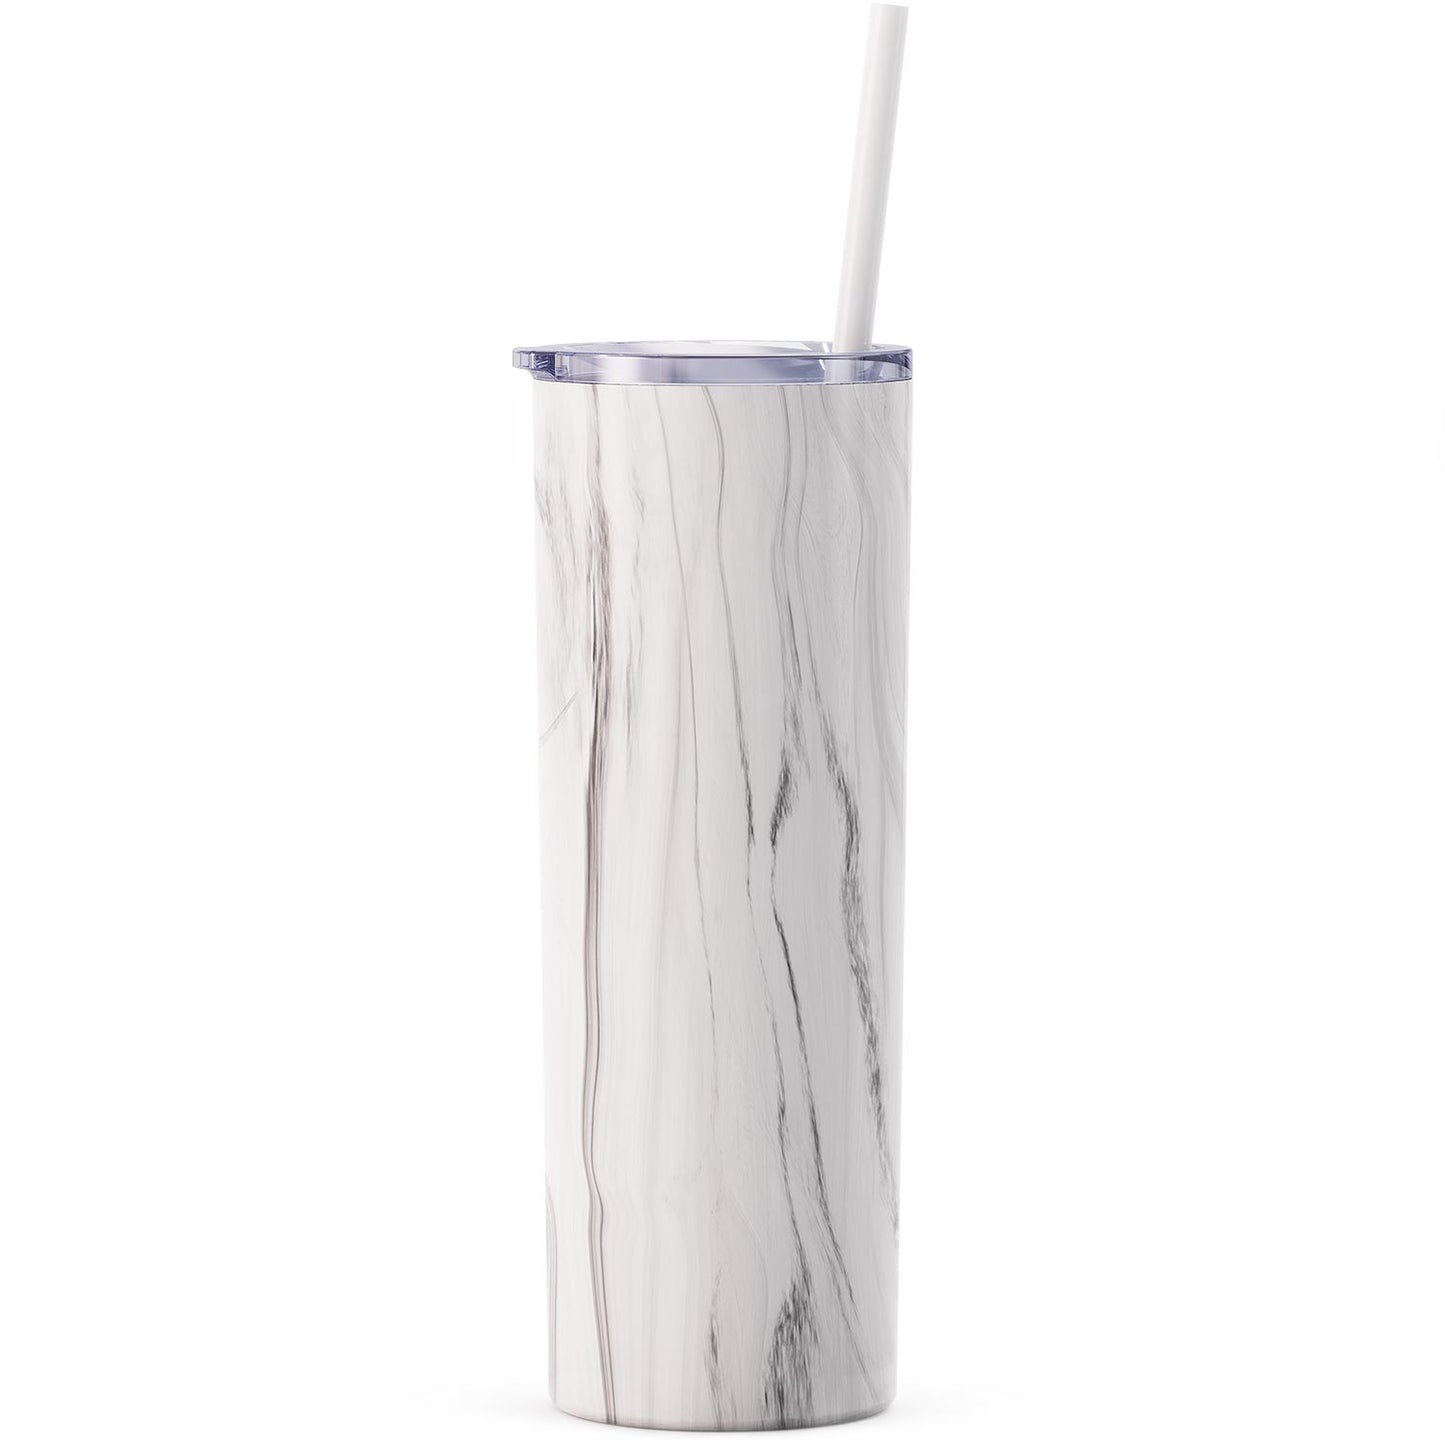 Marble Print Tumbler With Lid And Straw, Stainless Steel Thermal